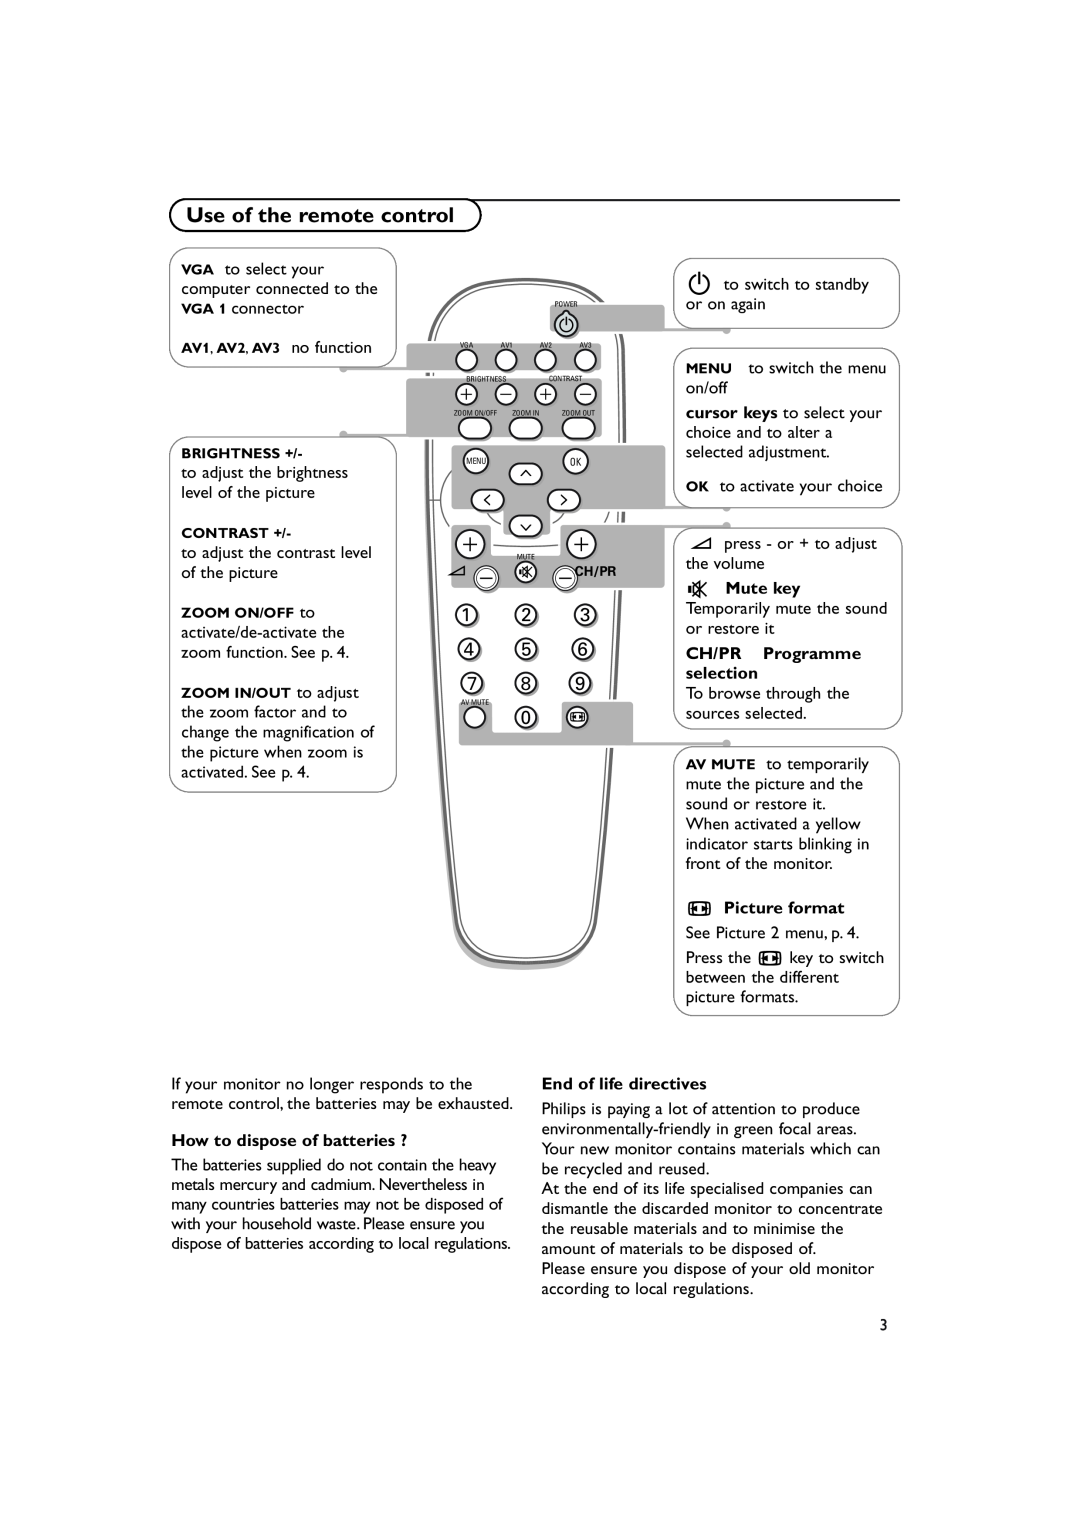 Philips RS232 Use of the remote control, ¬ Mute key, CH/PR Programme, selection, q Picture format, End of life directives 